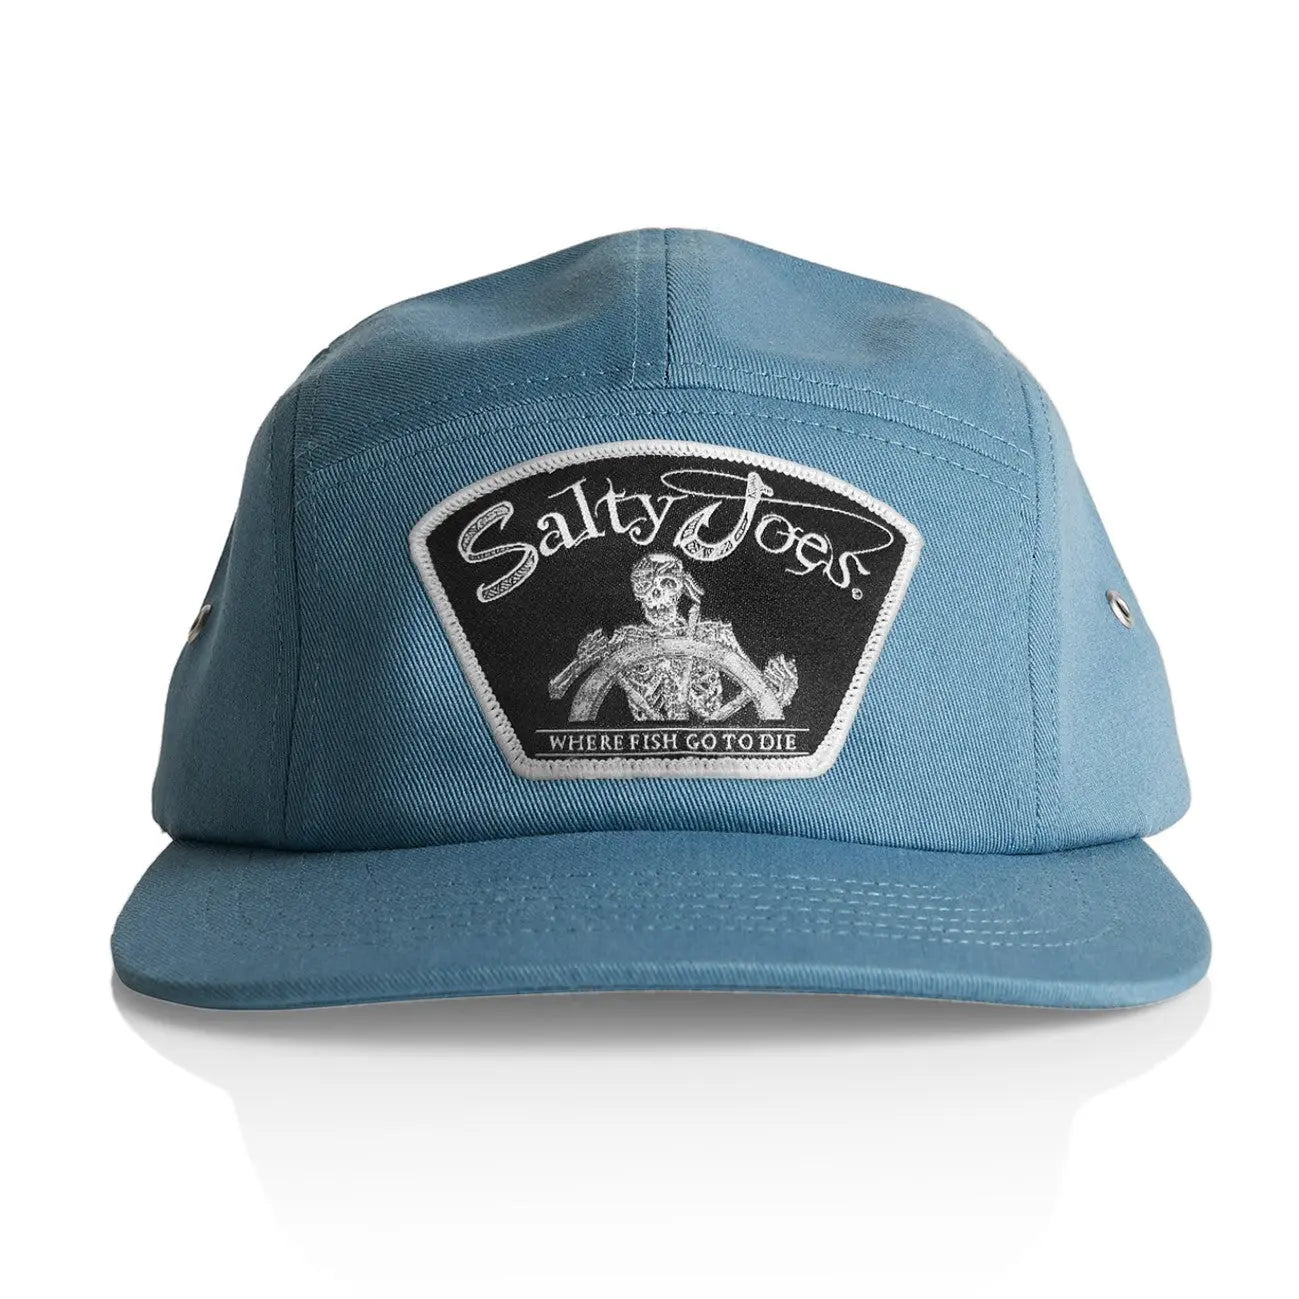 Salty Joe's Back From The Depth Patch Five Panel Fishing Snapback